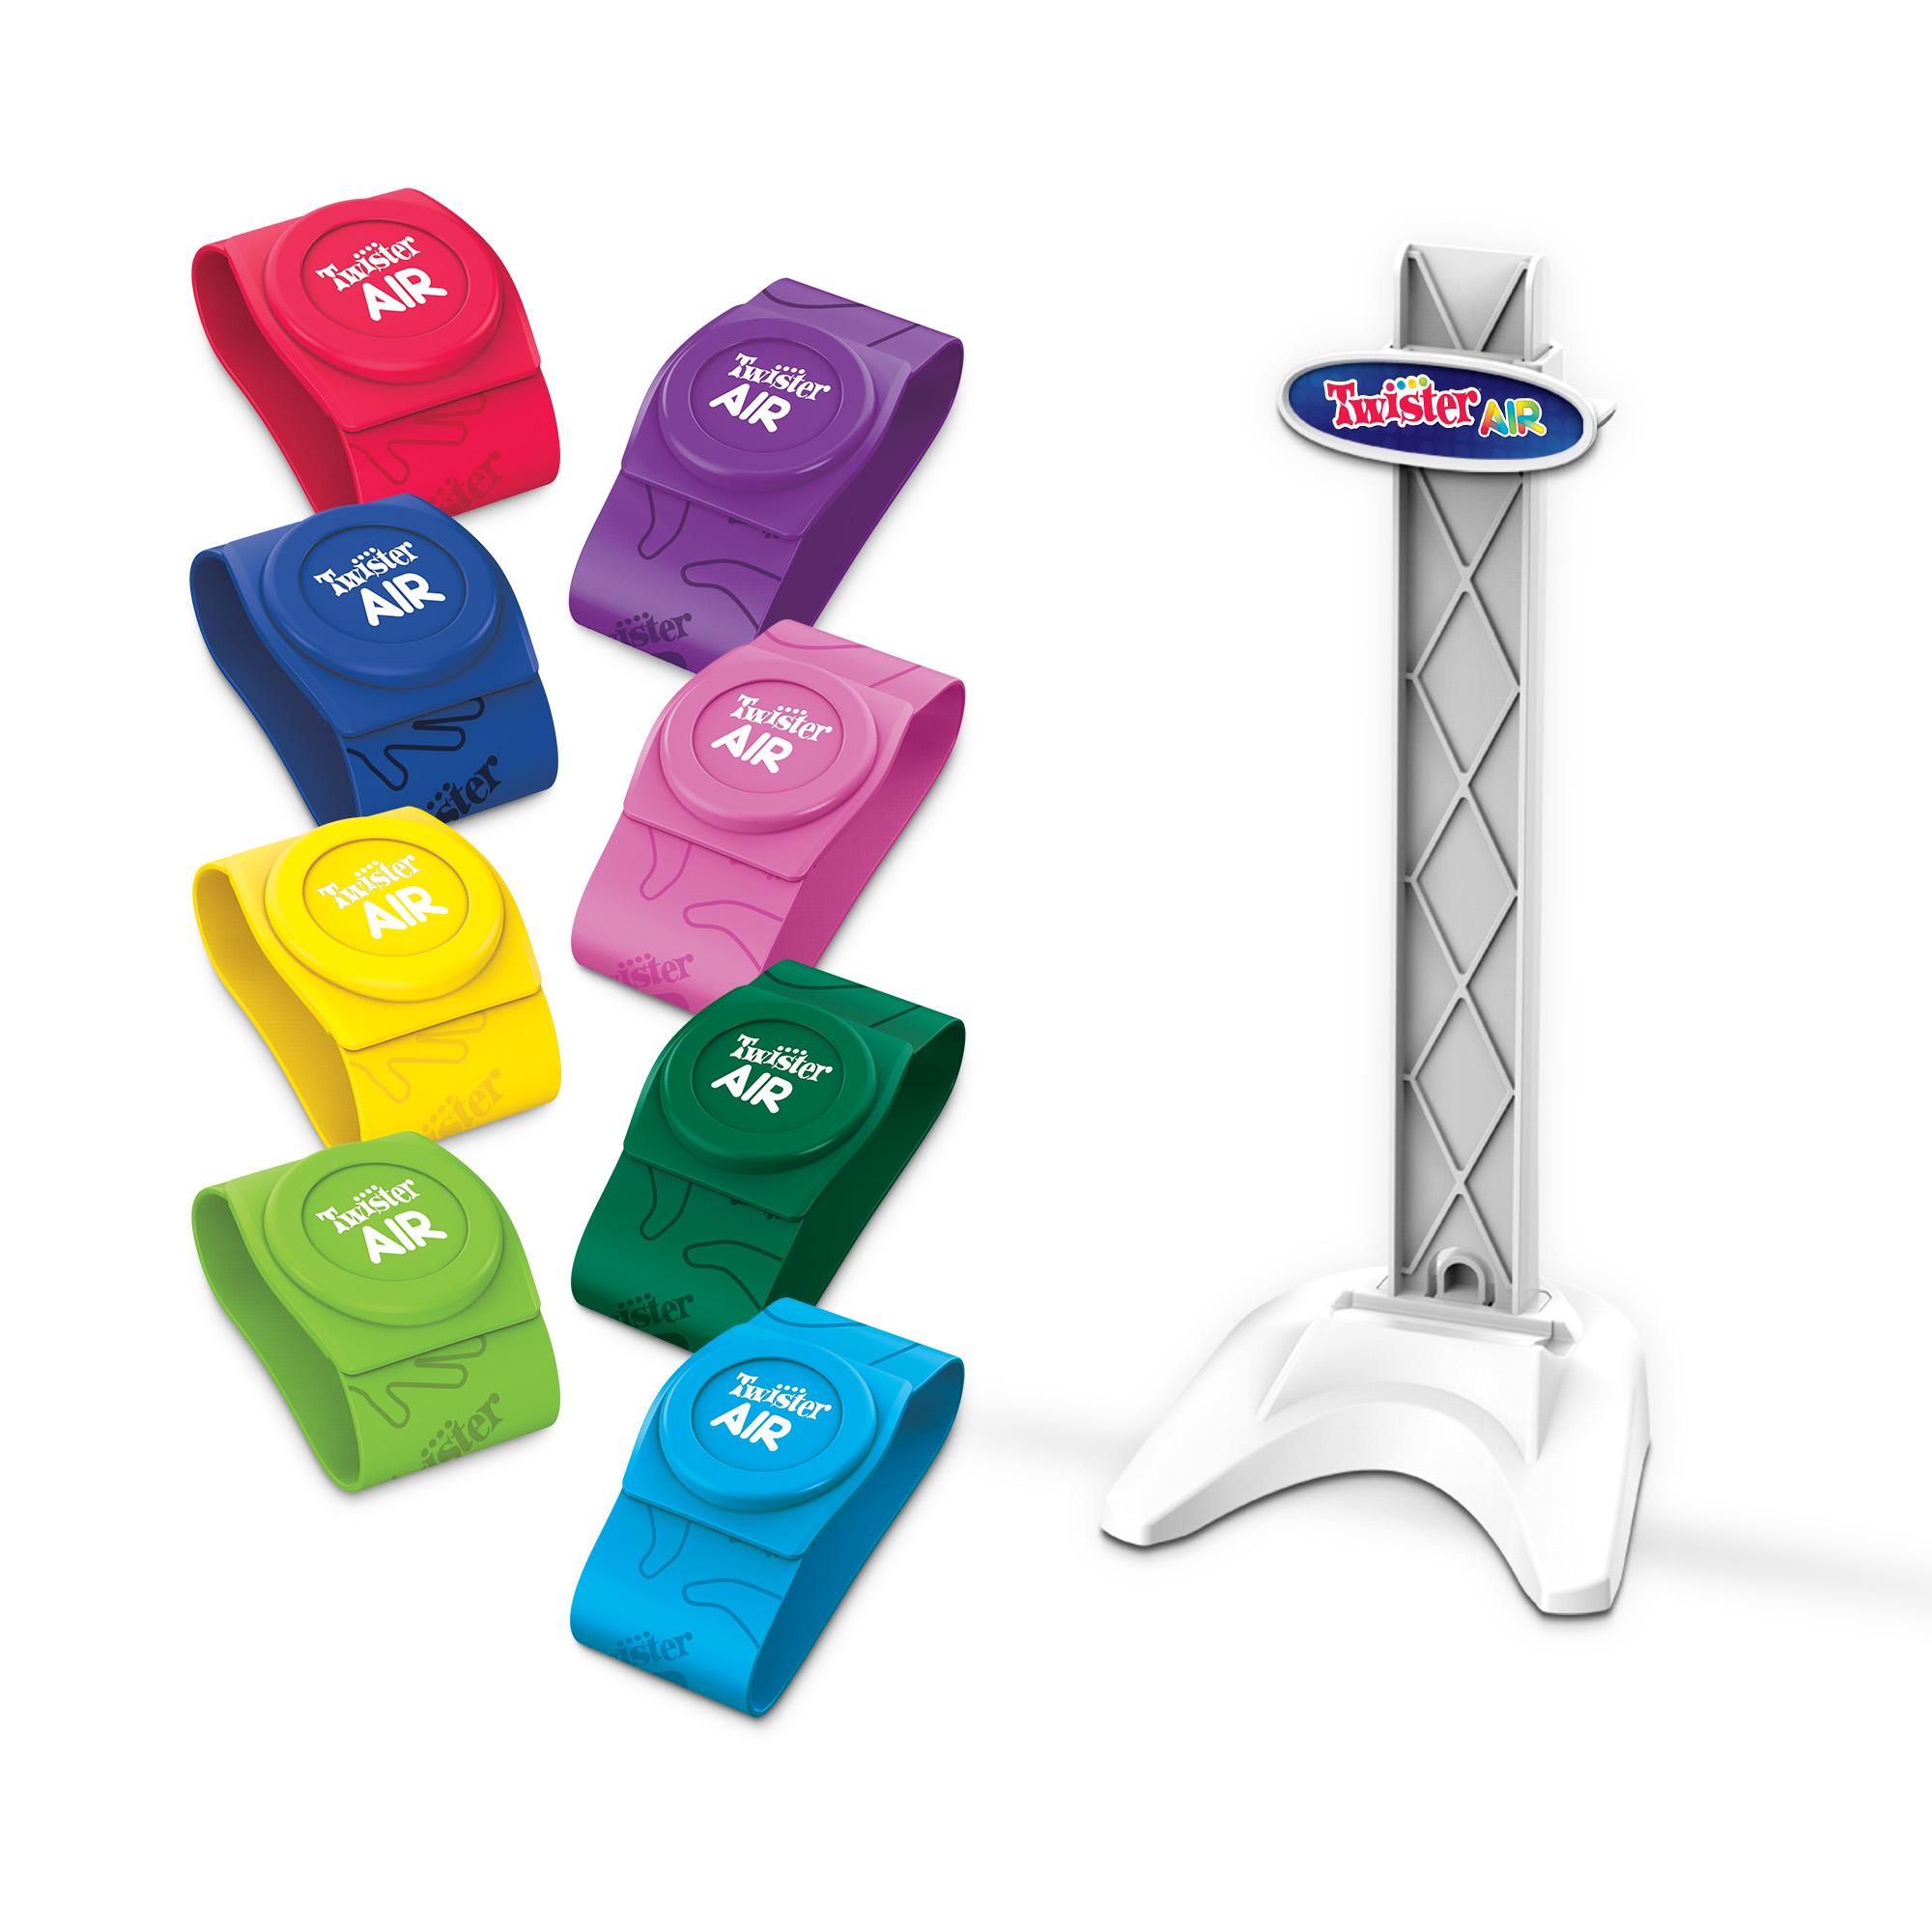 Twister Junior, foot, Little hands, little feet, BIG fun. Grab yours here  >>  By Hasbro Gaming